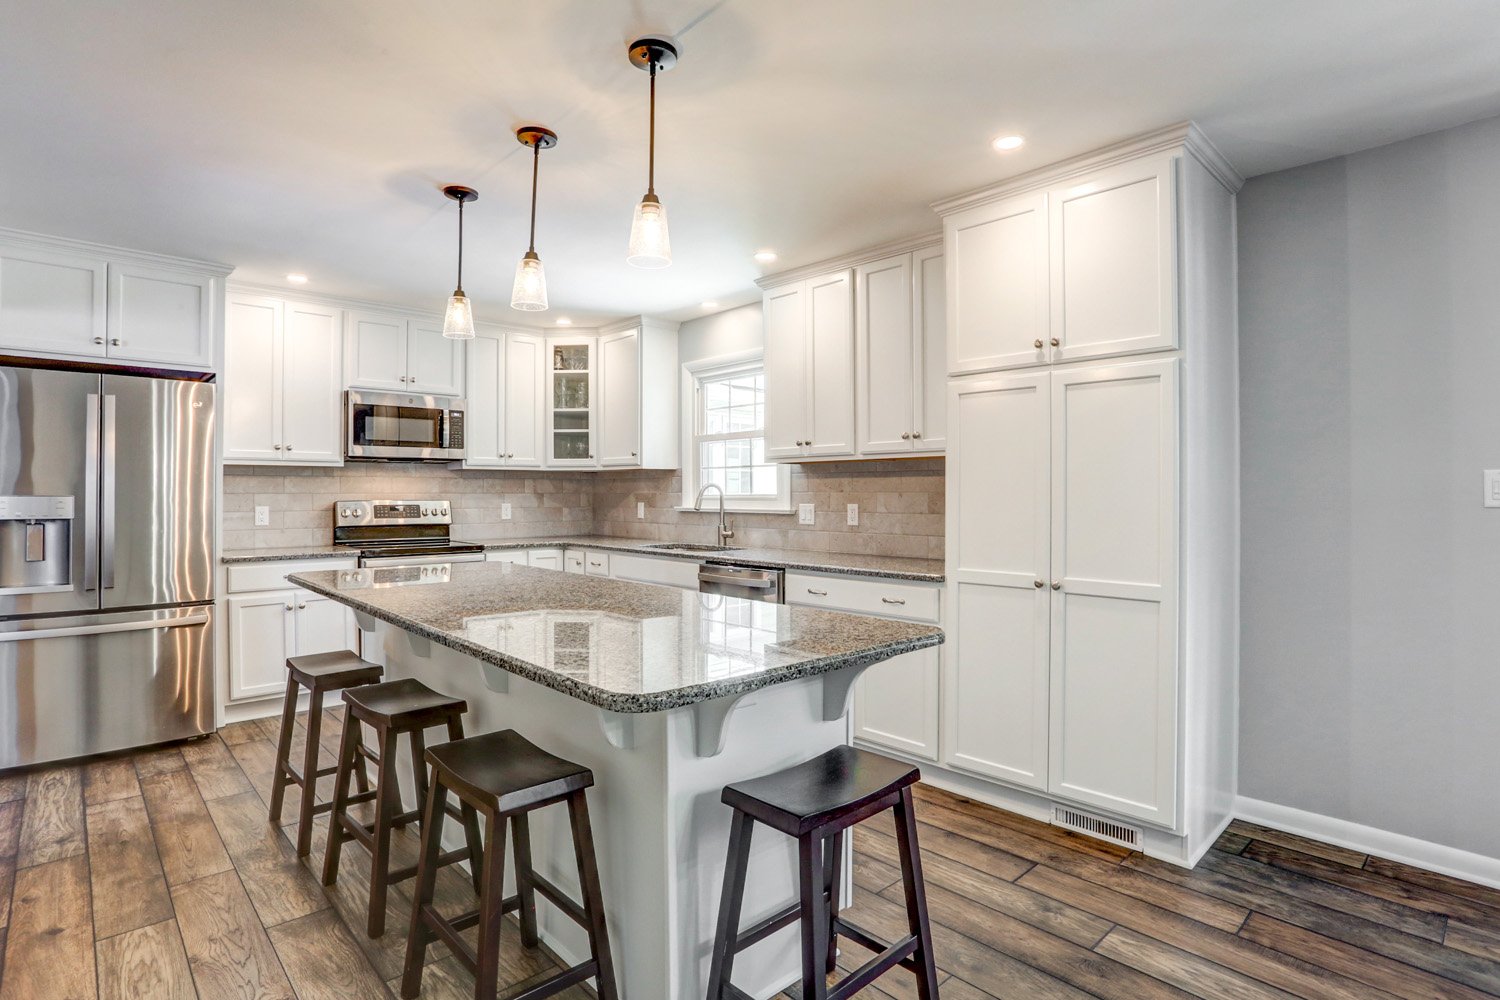 Lititz kitchen remodel with white cabinets and an island